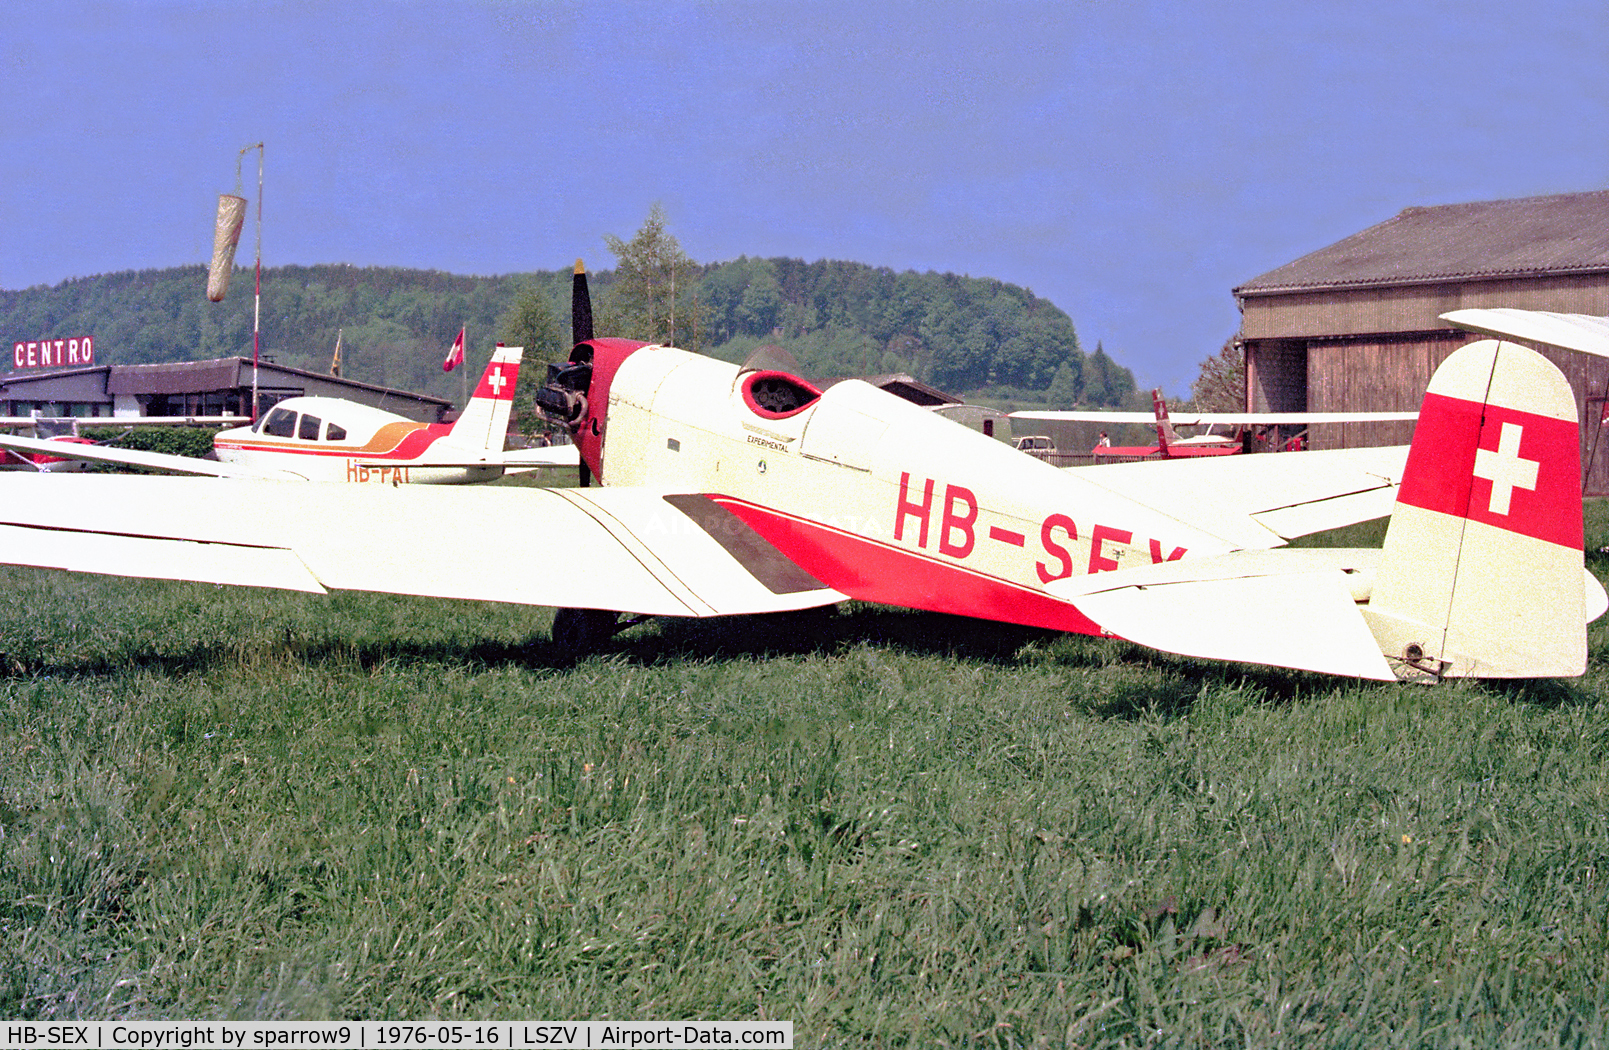 HB-SEX, 1934 DKW-Erla ME.5A C/N 14, A sunny day at Sitterdorf. Scanned from a color-negative.